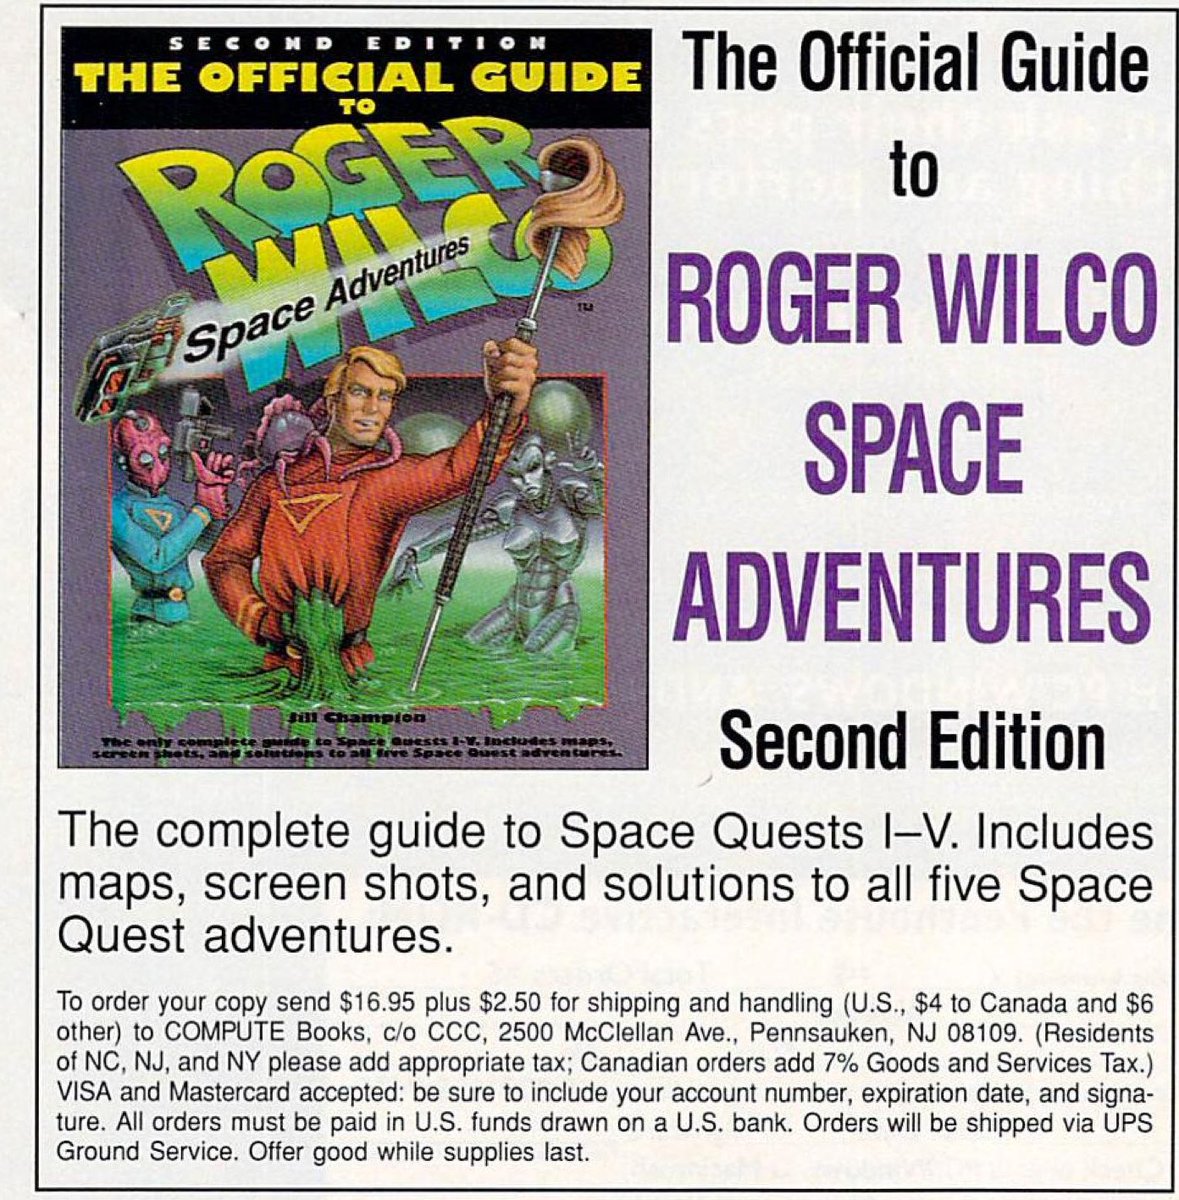 The official guide to "Roger Wilco Space Adventures"? Were you not allowed to call it Space Quest?